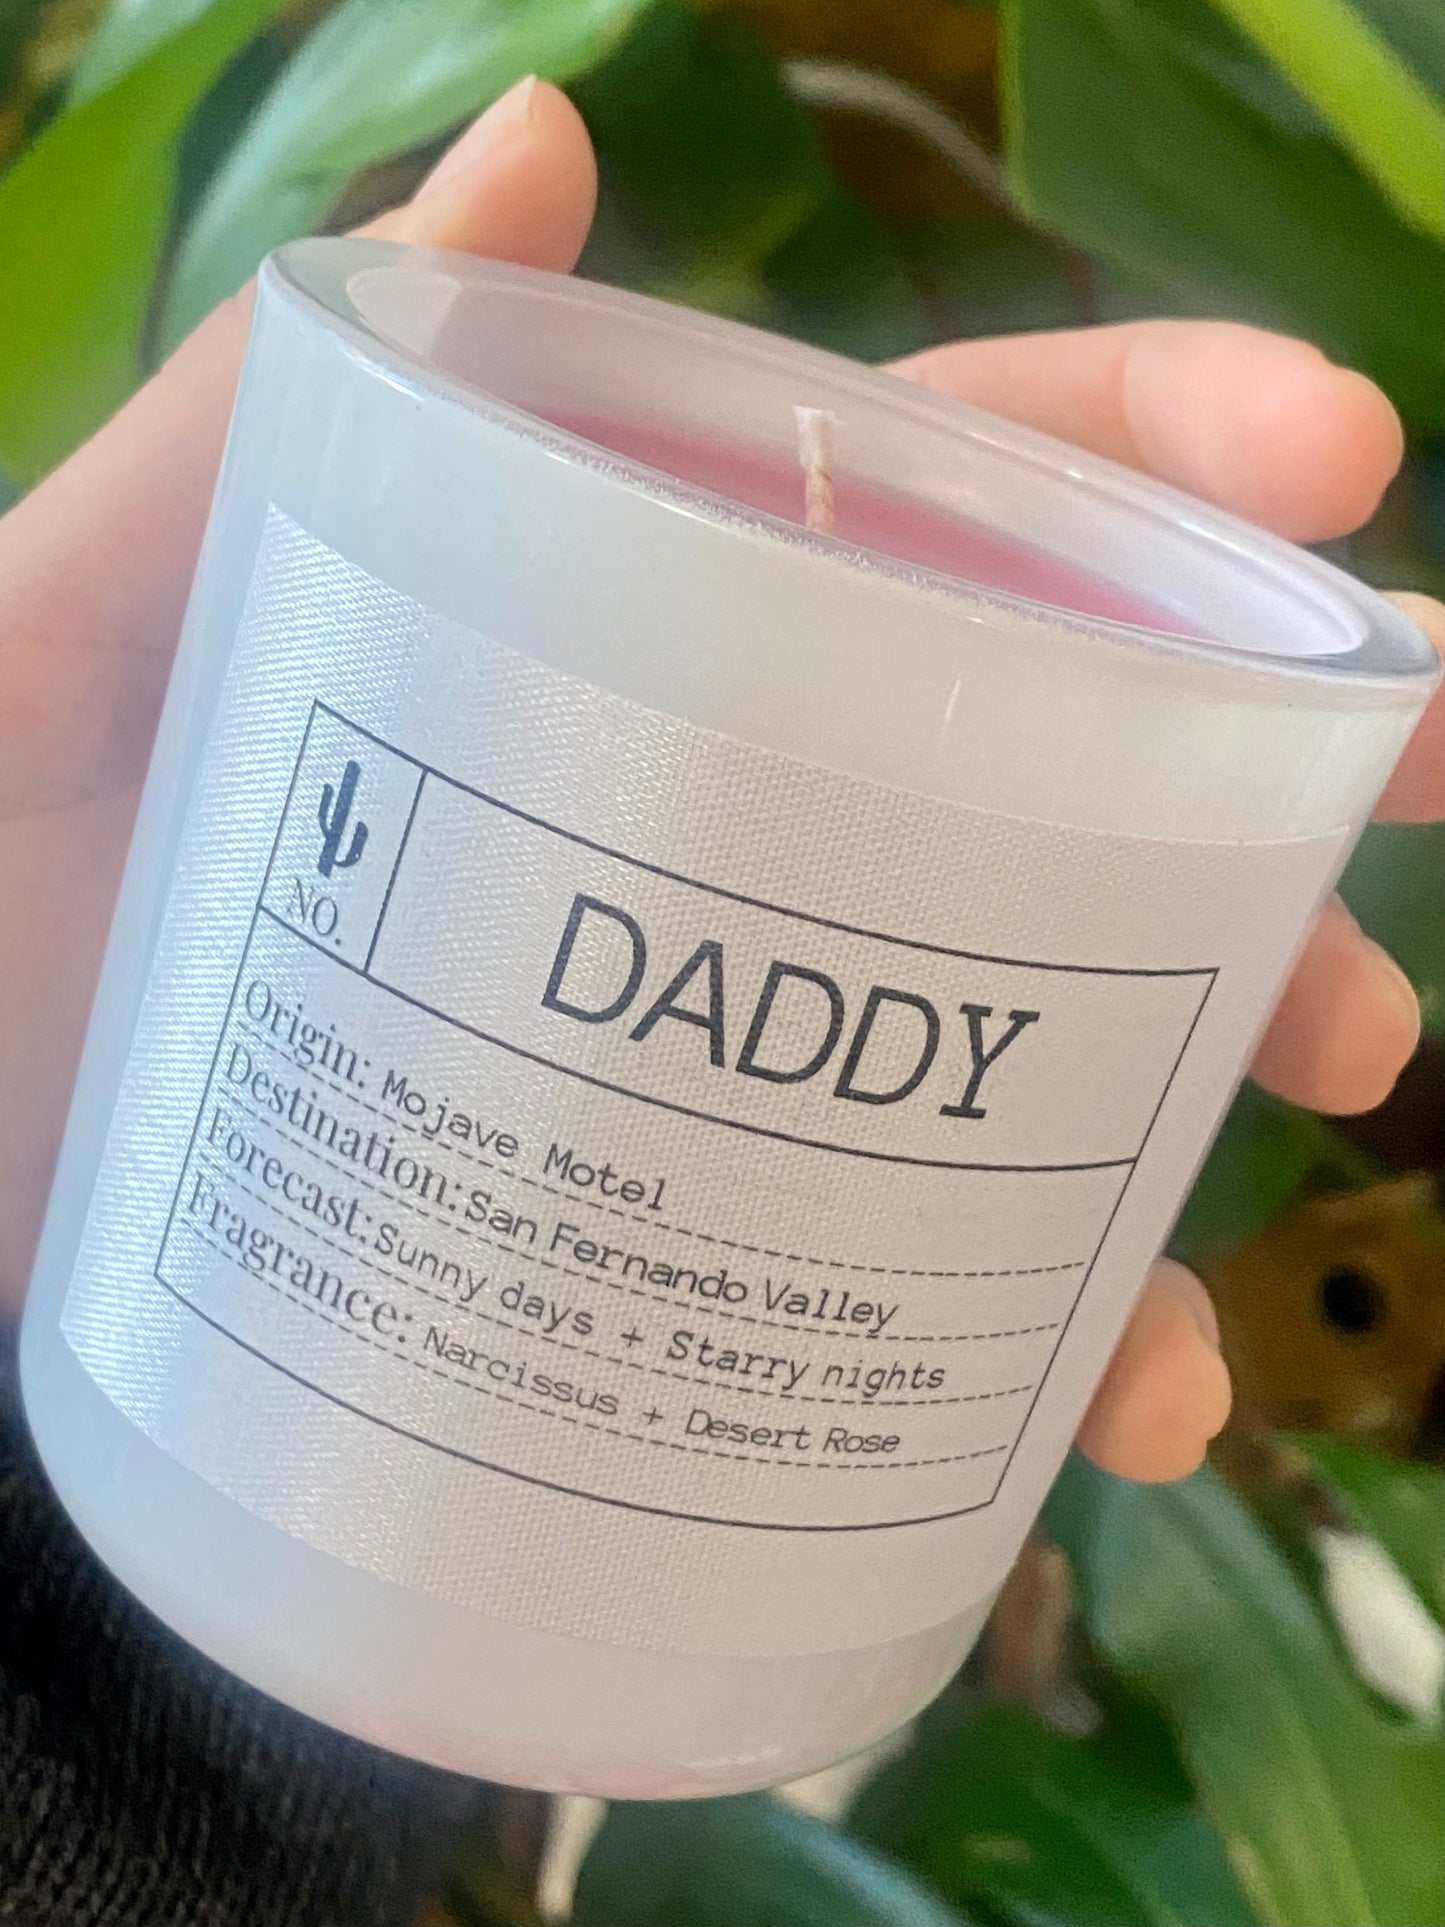 The DADDY Candle